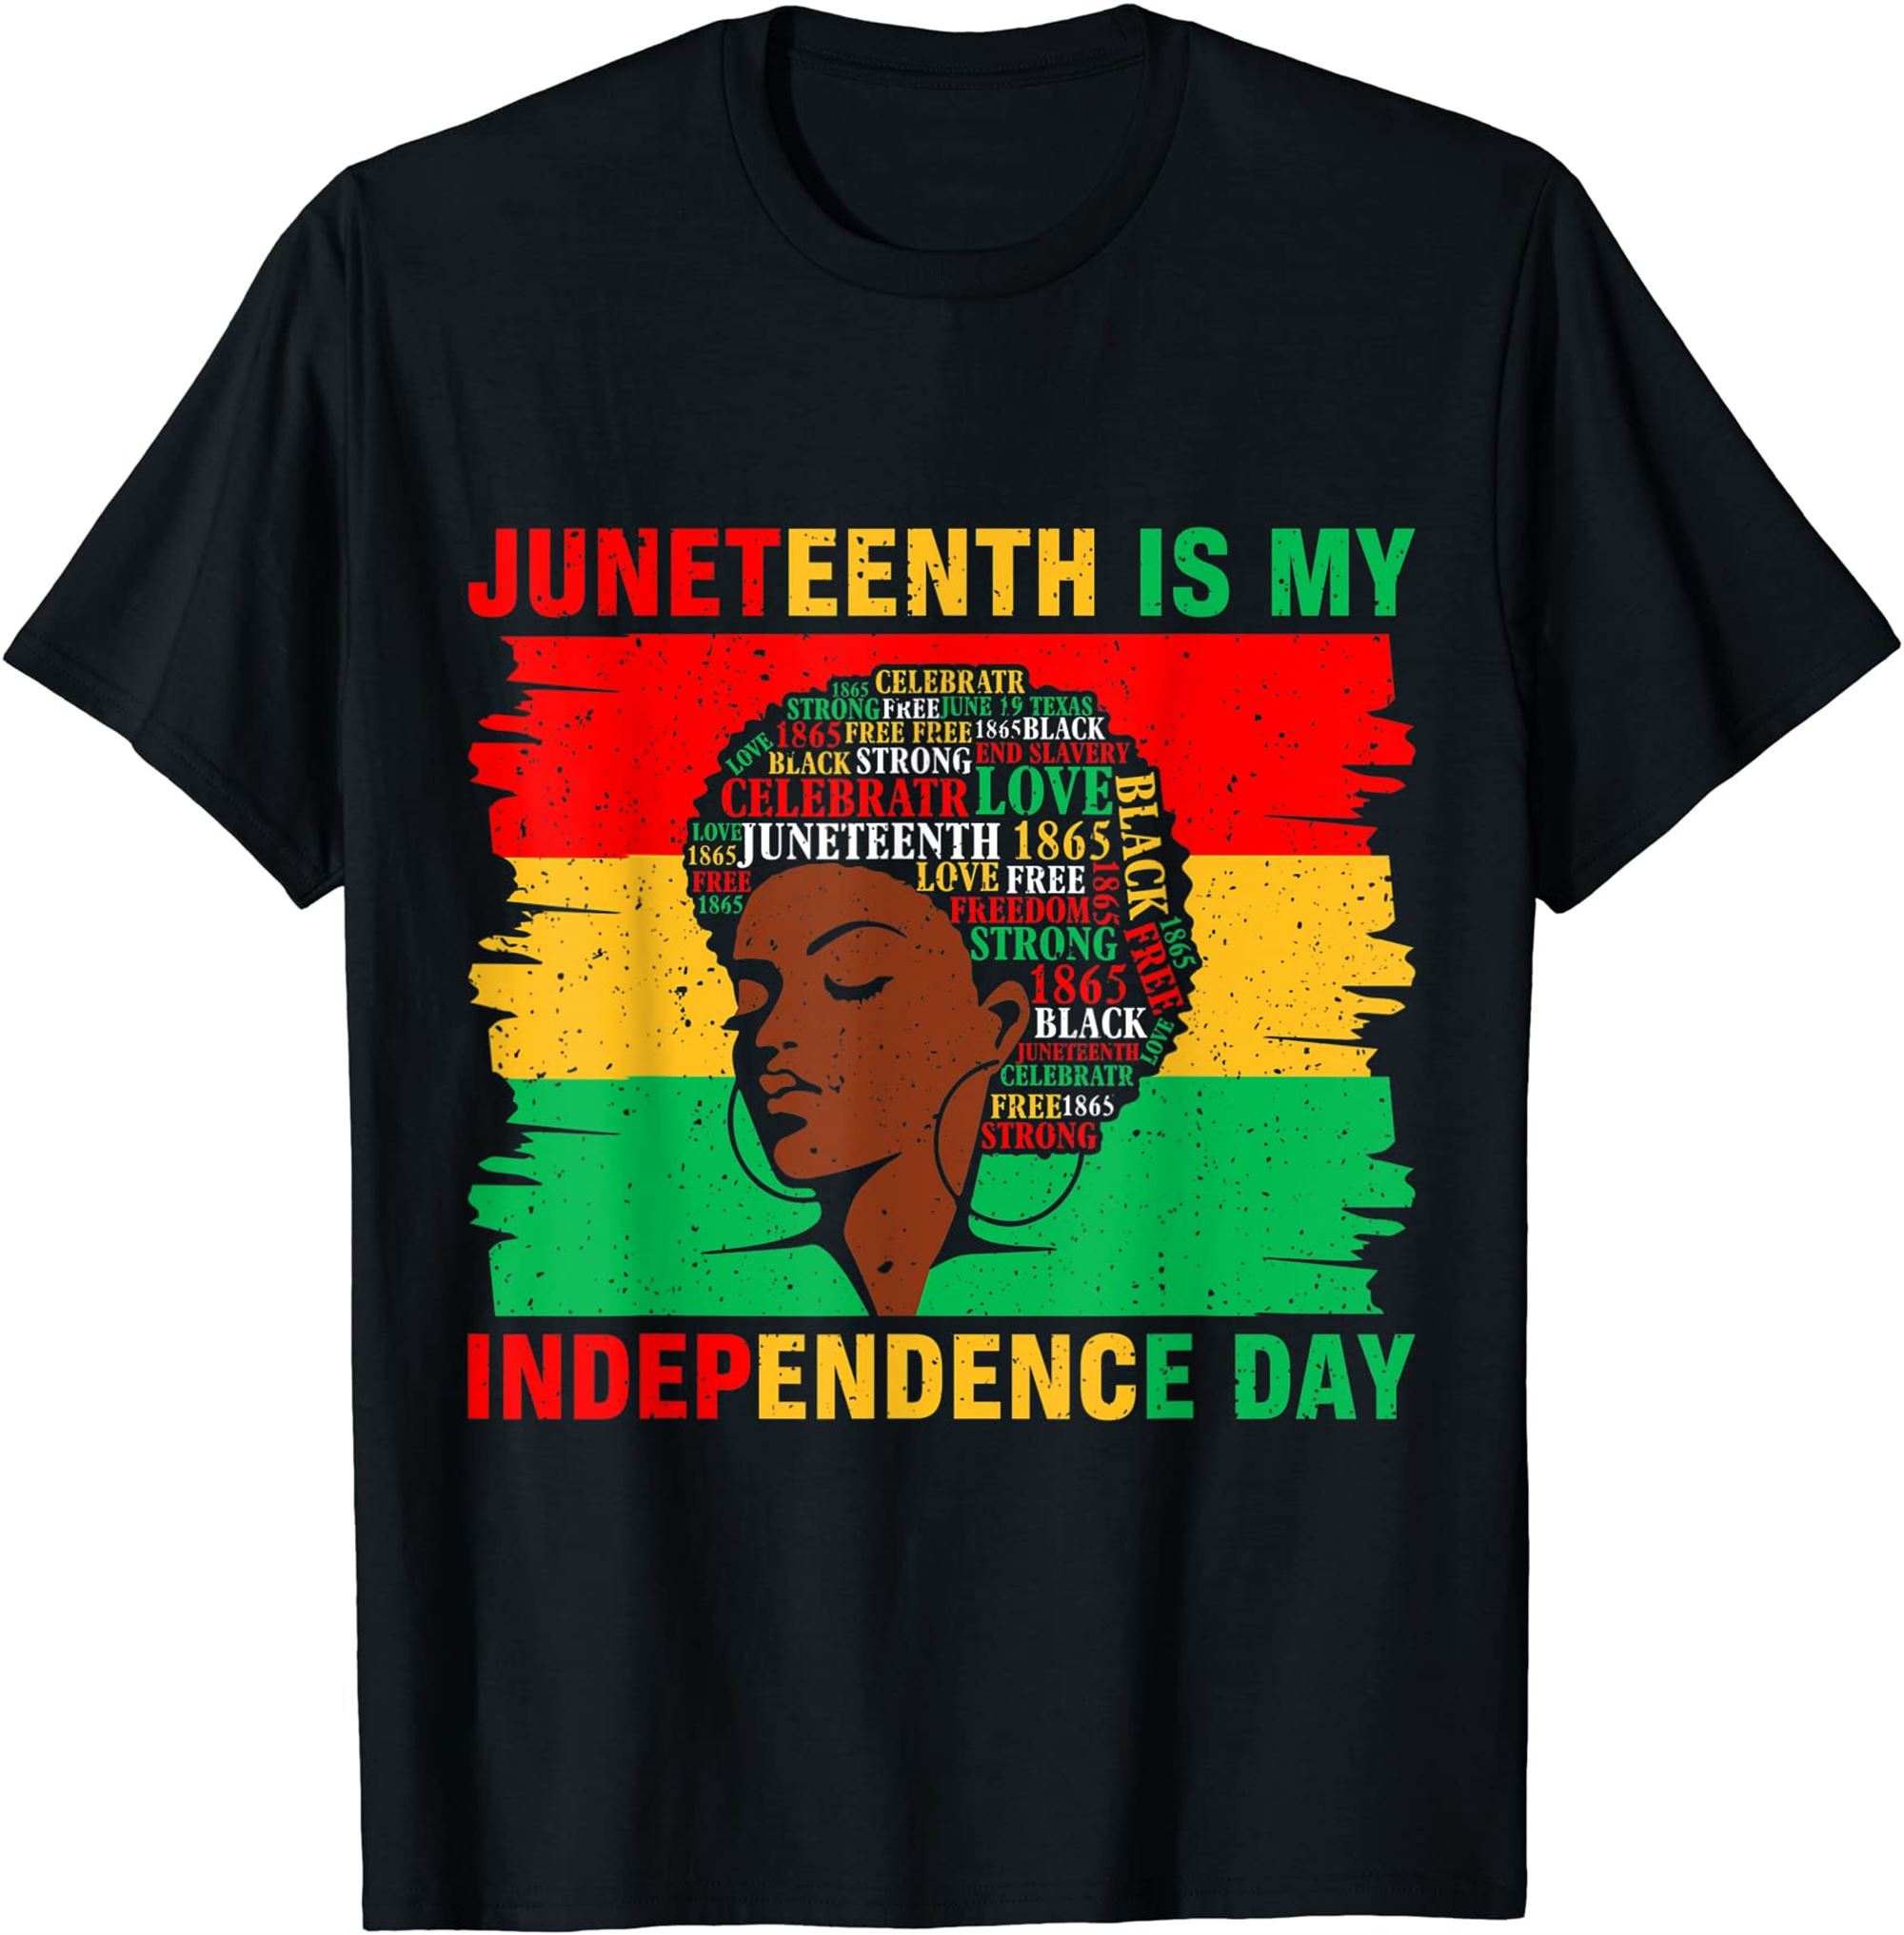 Juneteenth Is My Independence Day Black Women Black Pride T-shirt Full Size Up To 5xl